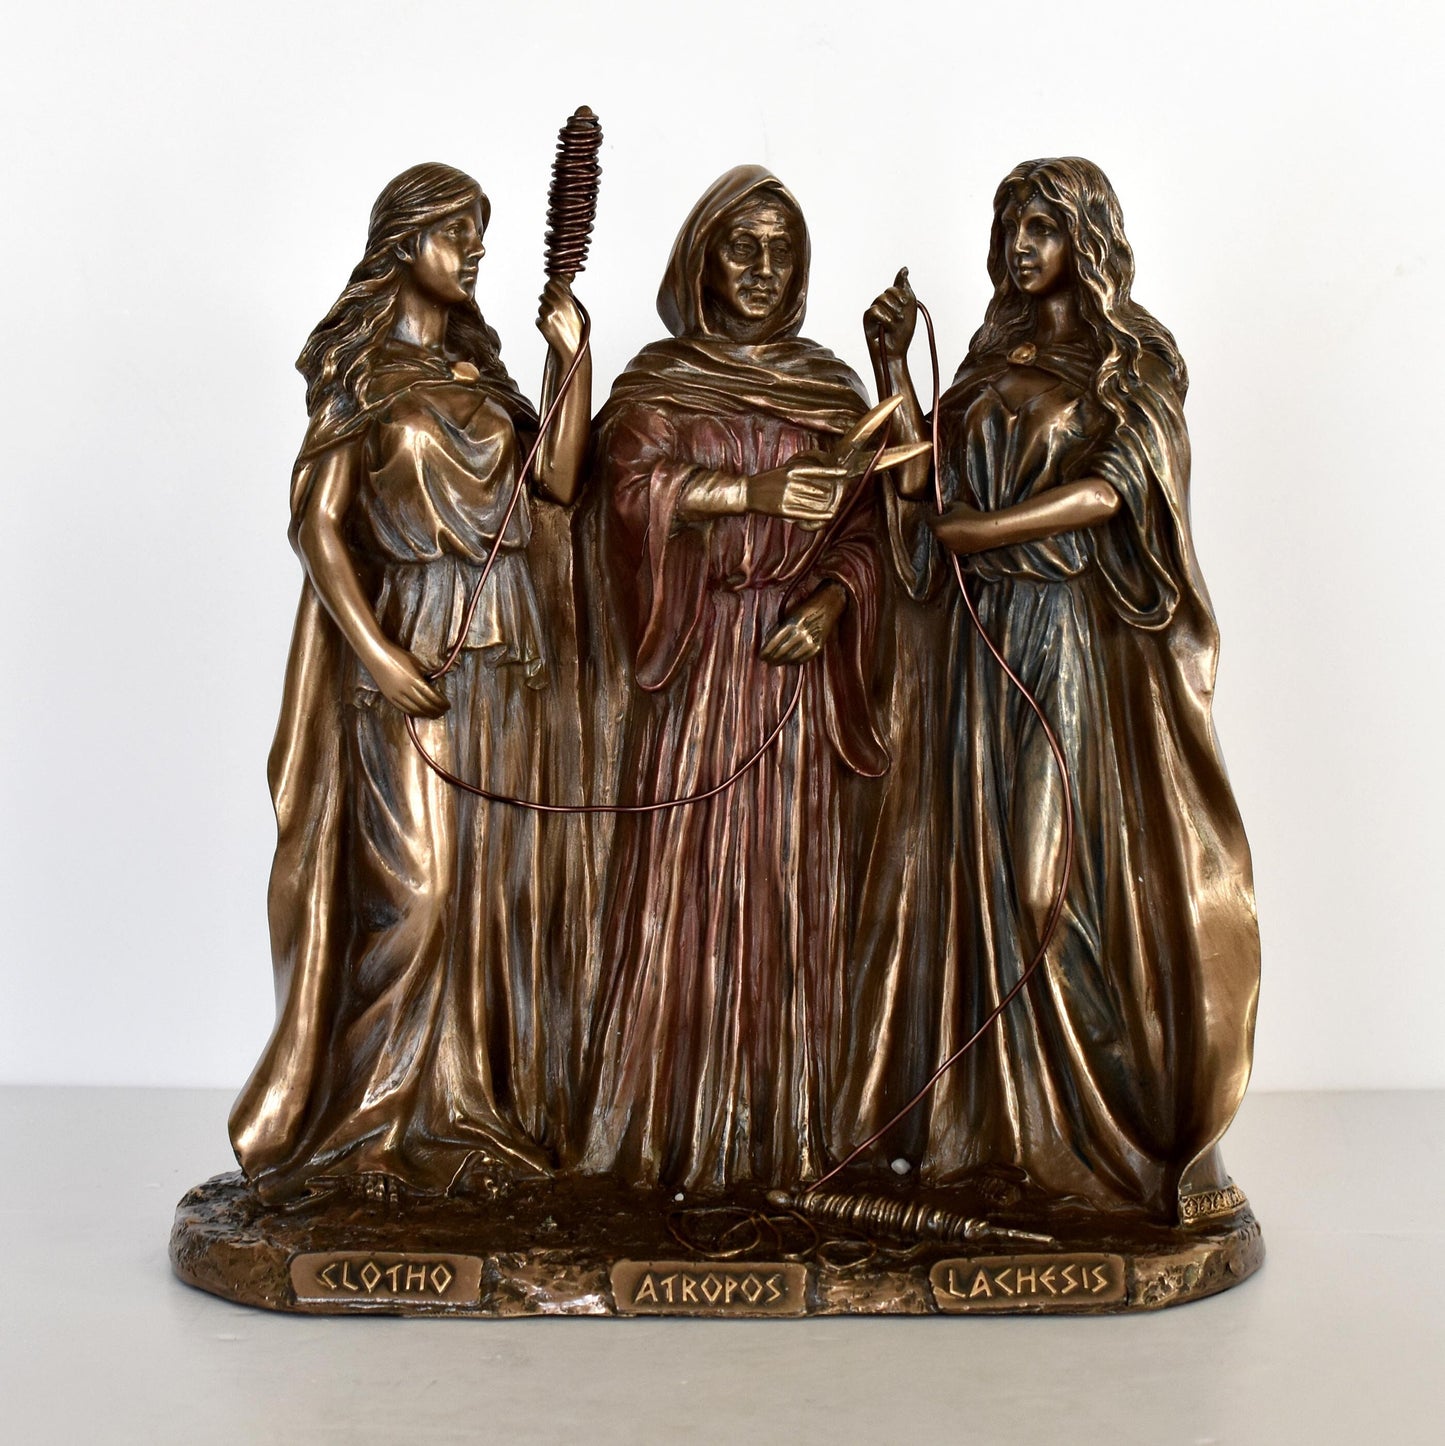 Fates Moirai - Clotho, Lachesis and Atropos - Fate Personifications - Every being lives by the laws of the universe - Cold Cast Bronze Resin